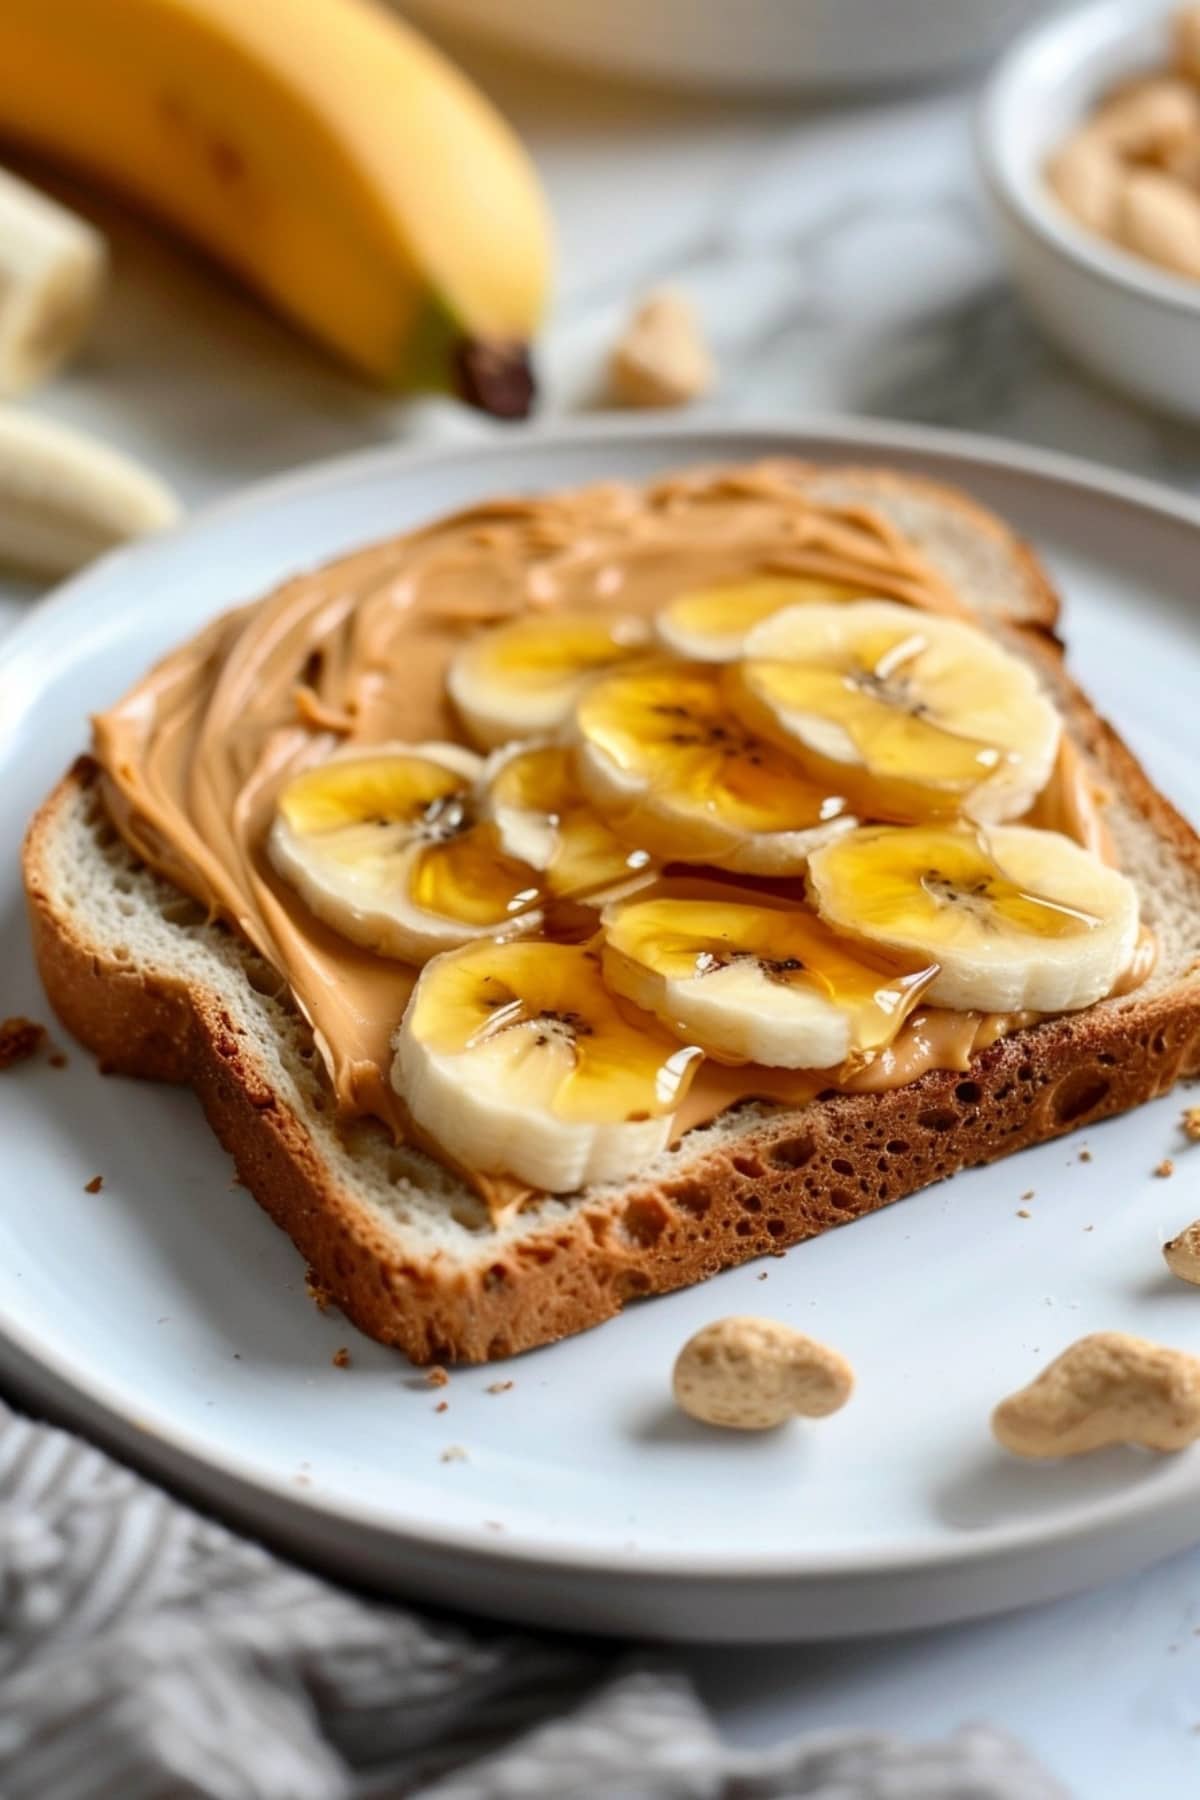 Sandwich topped with peanut butter, honey and banana filling